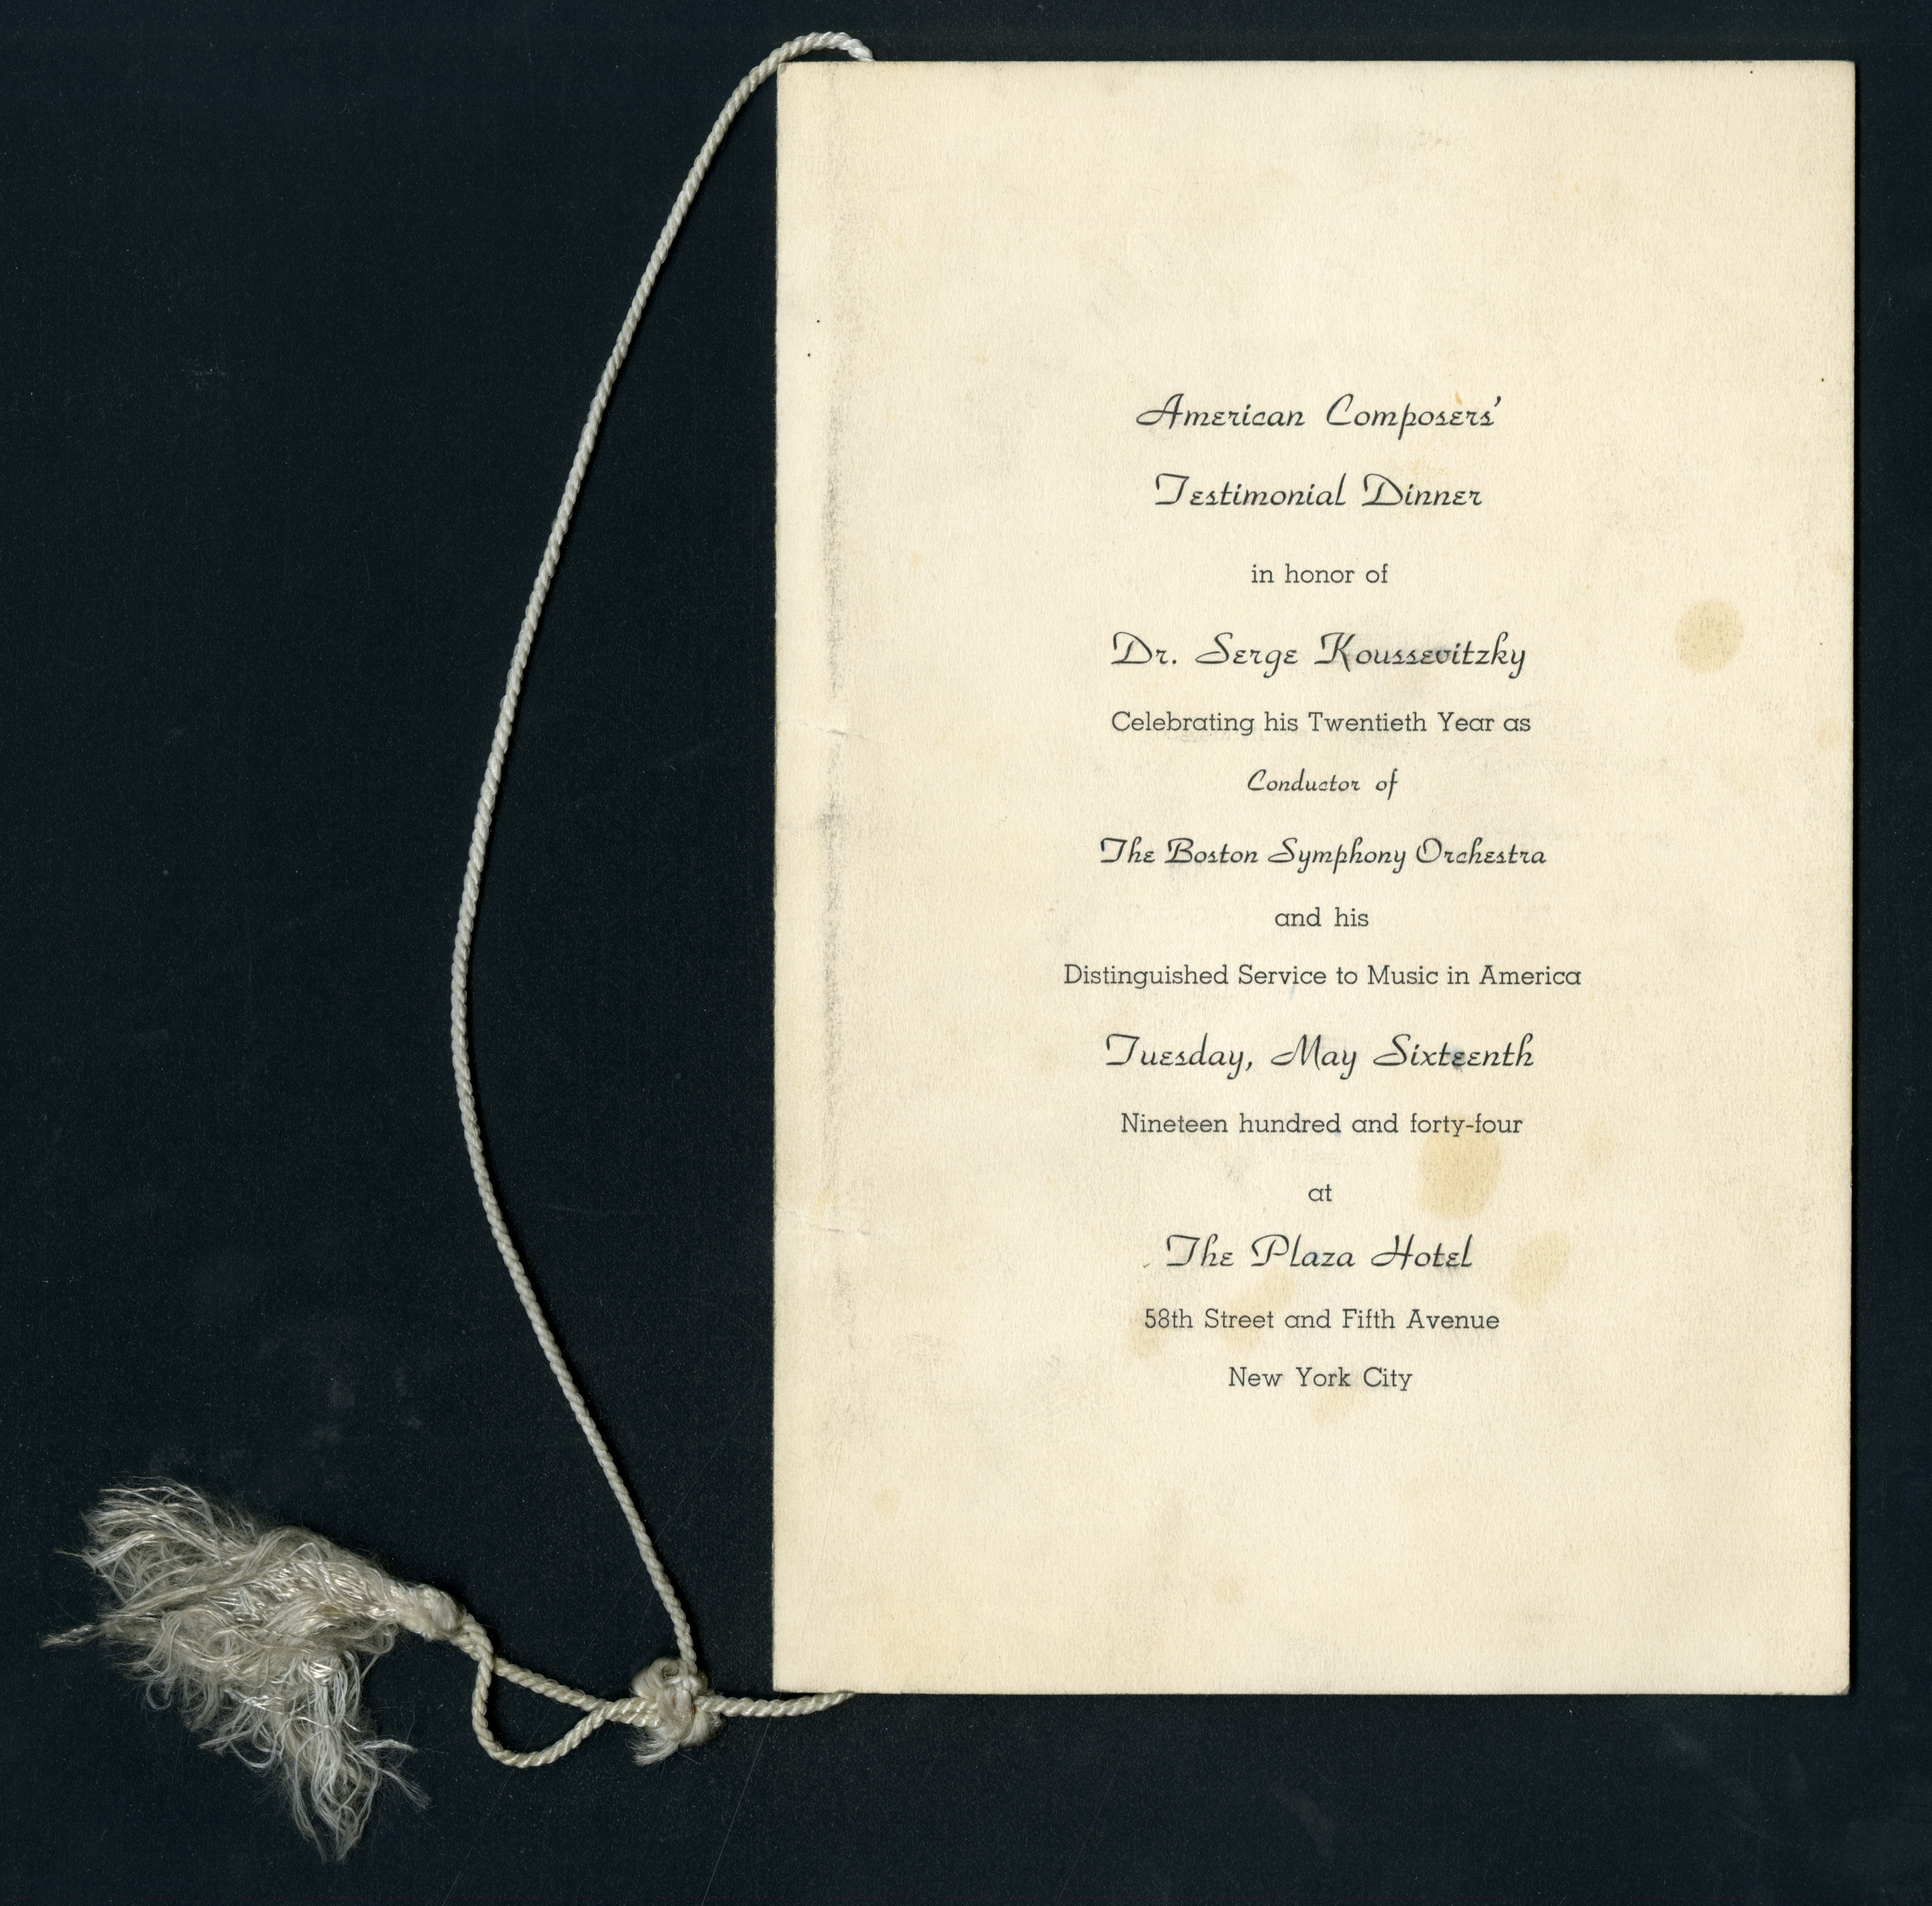 Program and dinner card for the American Composers’ Testimonial Dinner, May 16, 1944